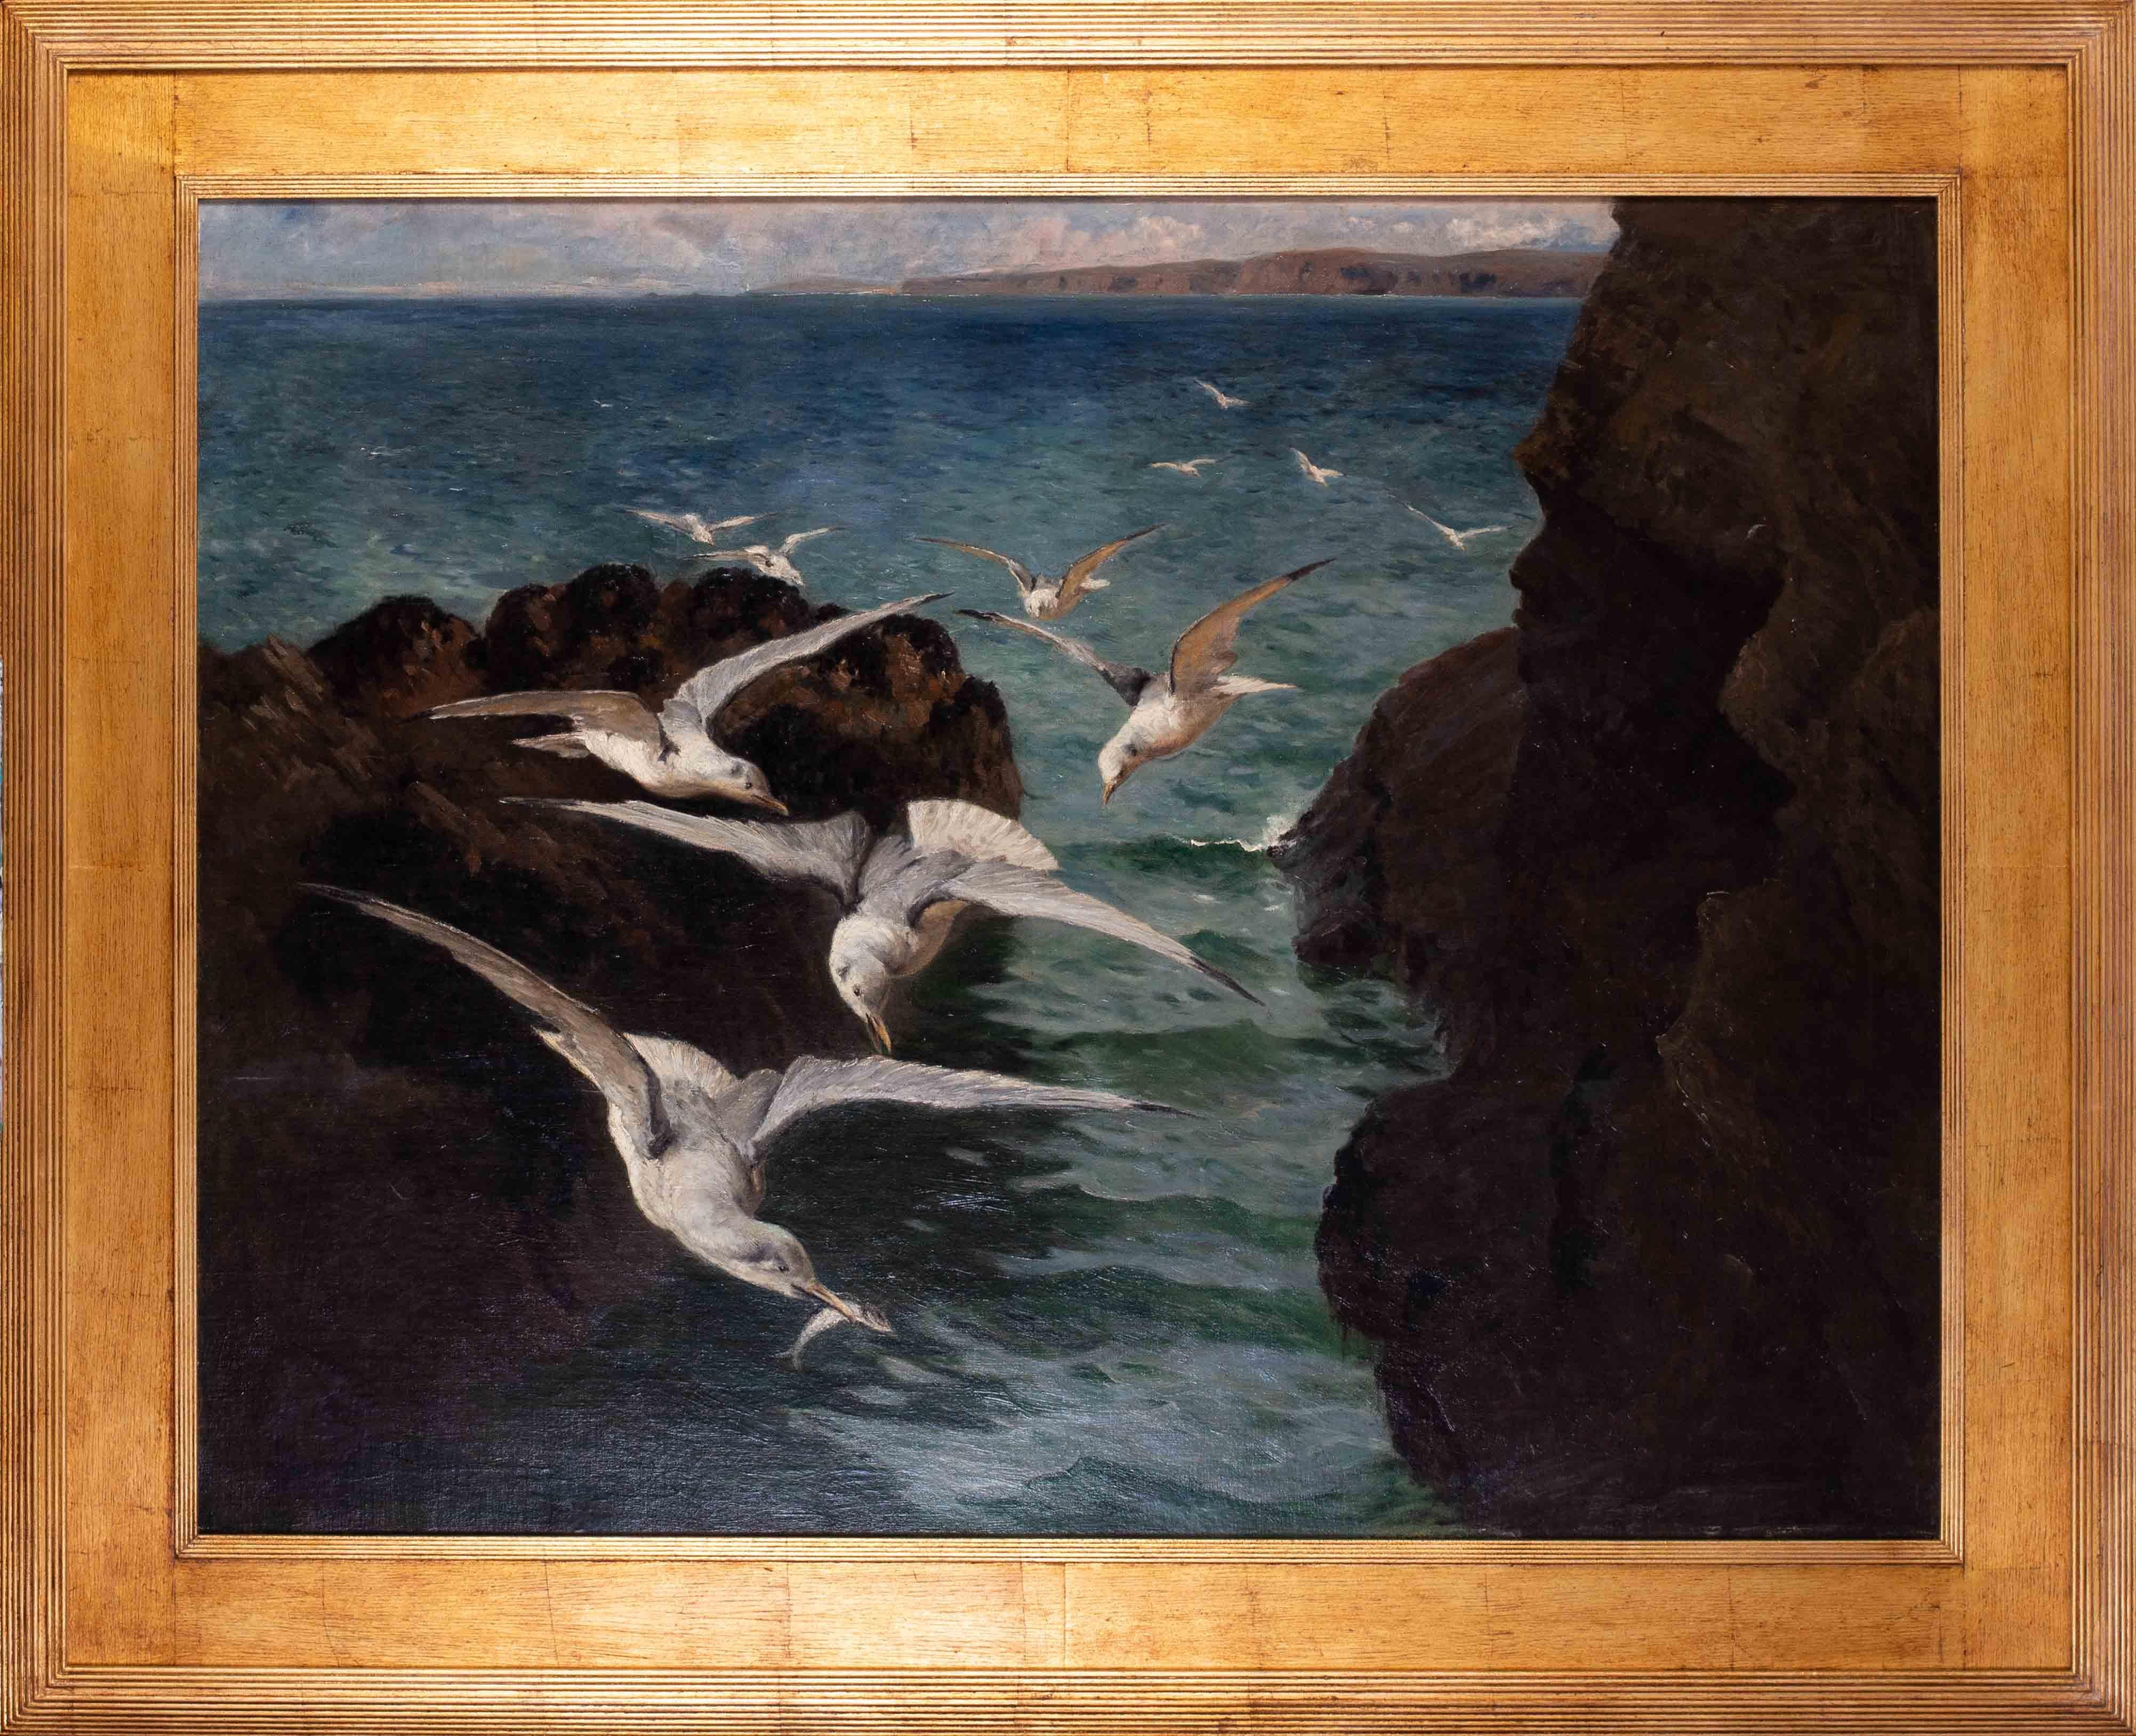 Large oil paintings of Gulls at St. Ives bay, Cornwall by British artist Titcomb